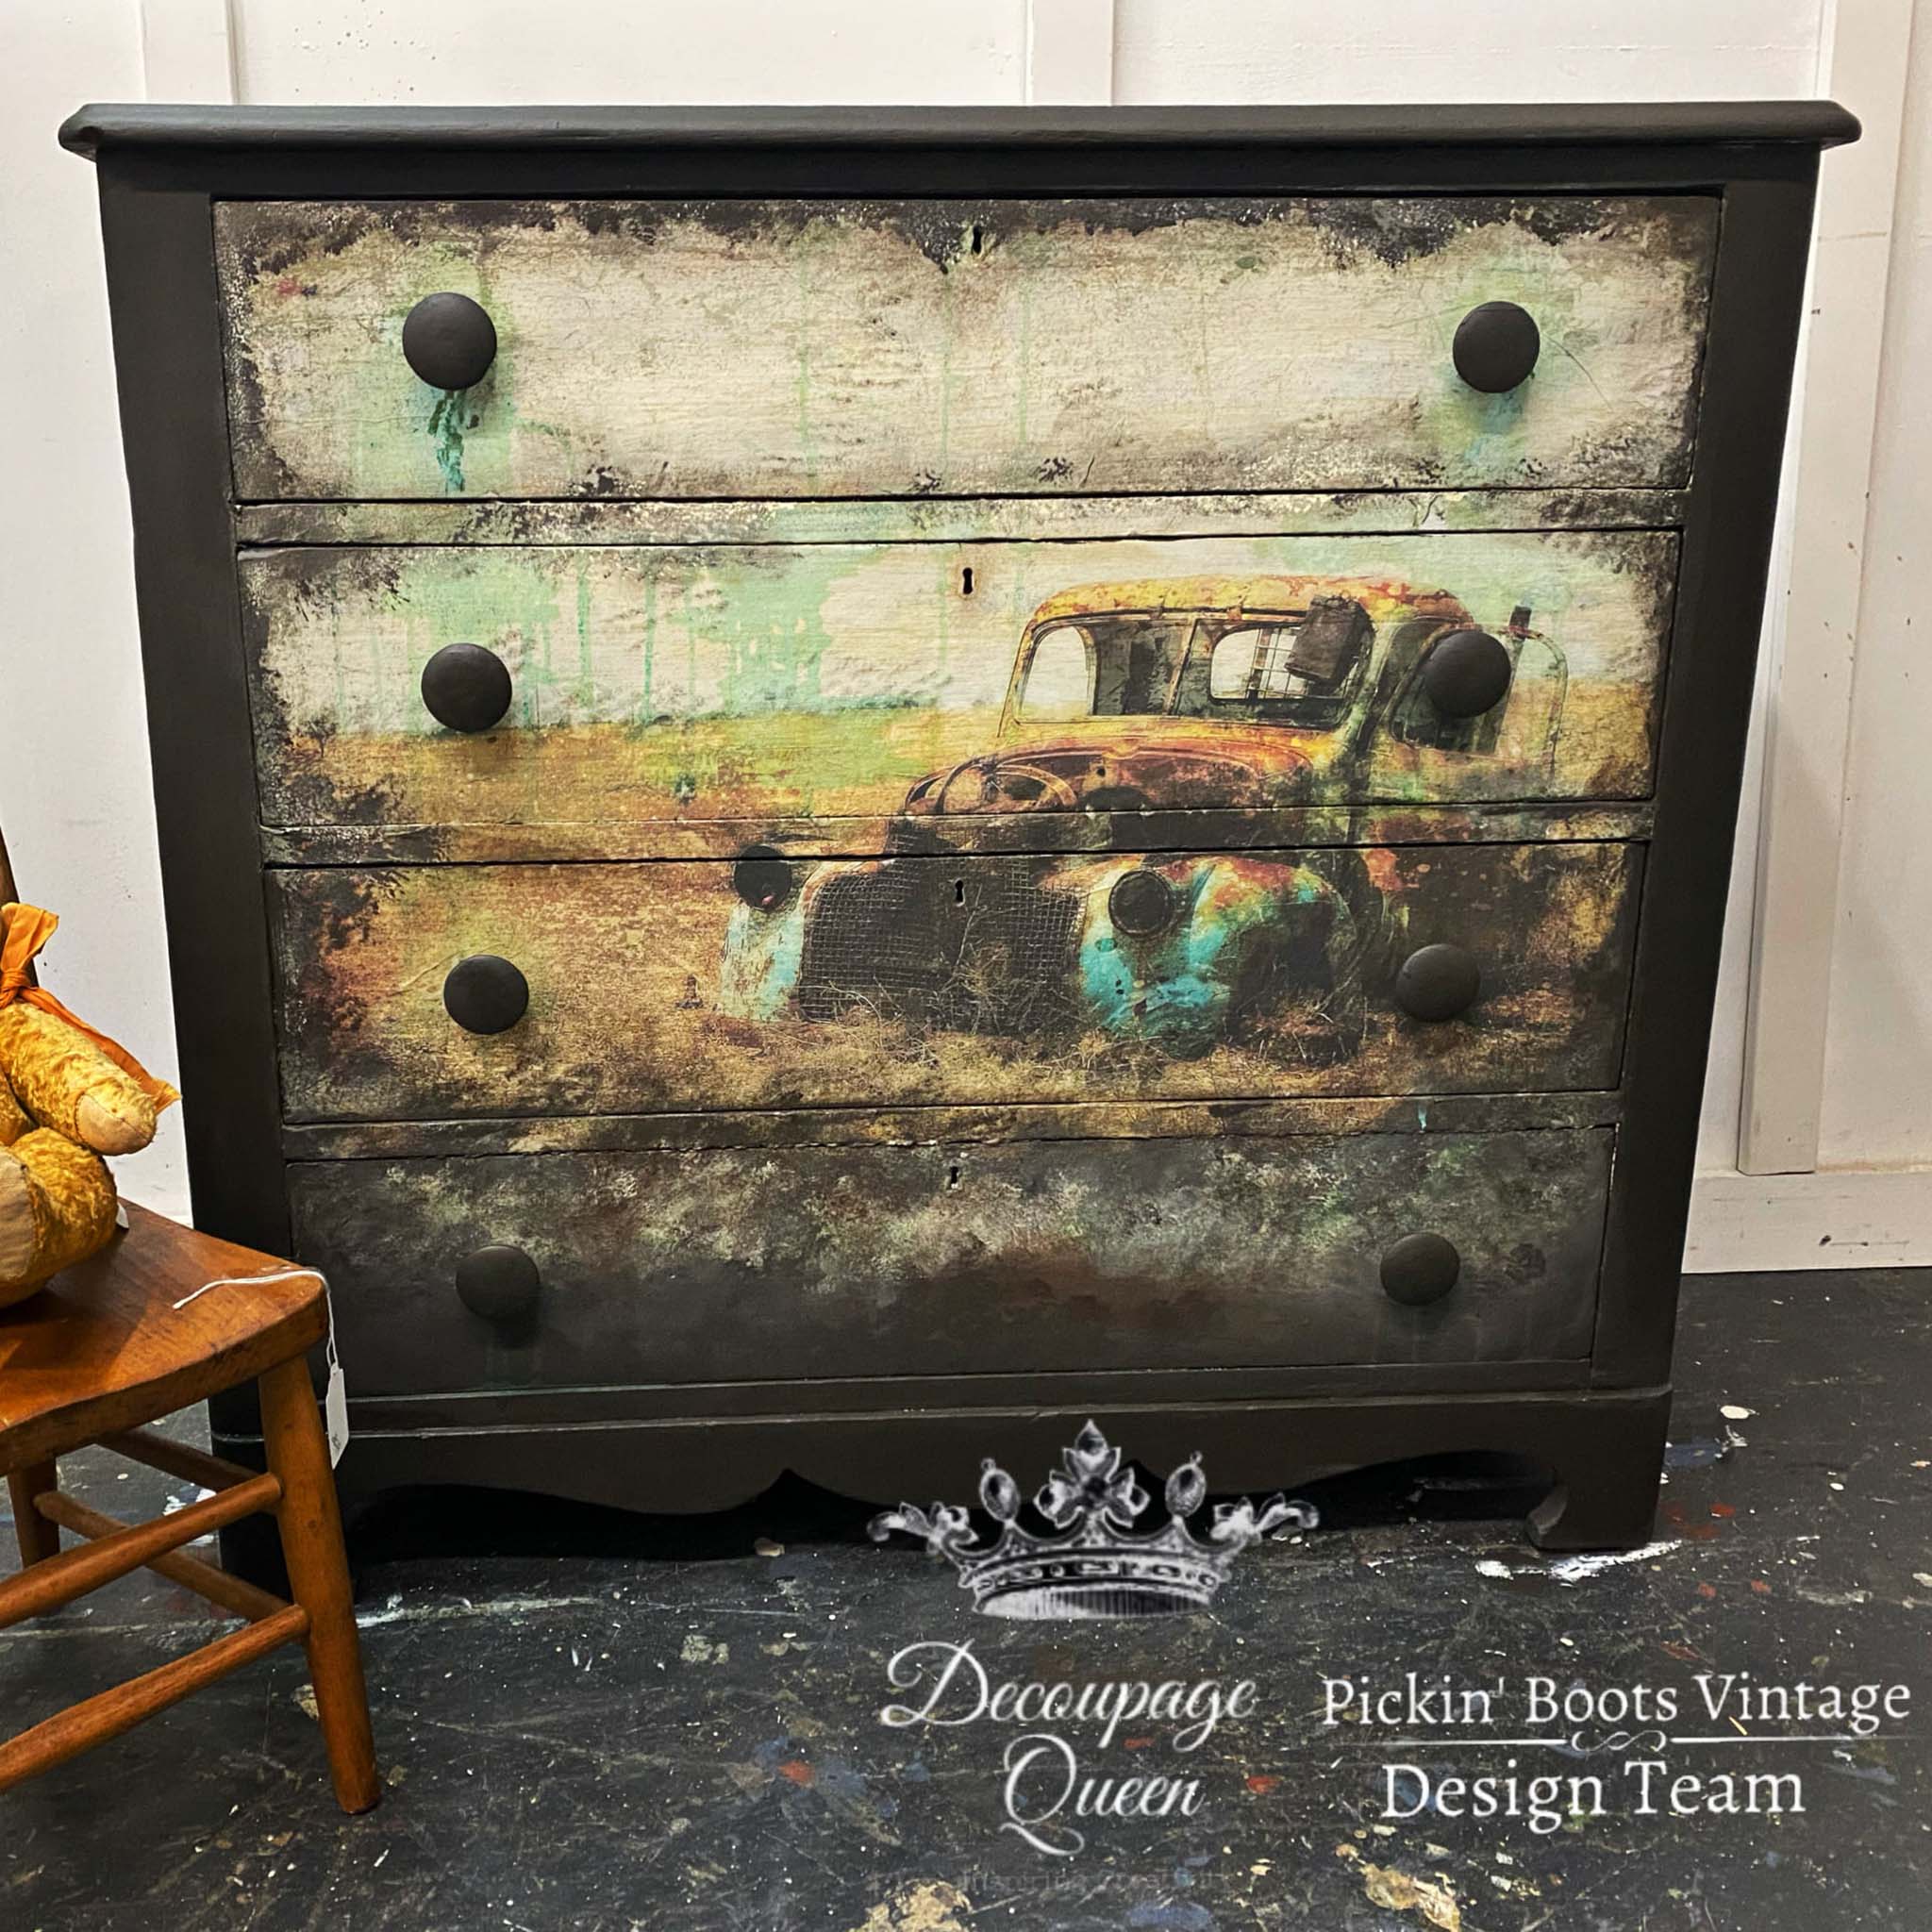 Black dresser with the Abandoned decoupage paper on top. A white Decoupage Queen and Pickin Boots Vintage Design Team logo on the bottom right.